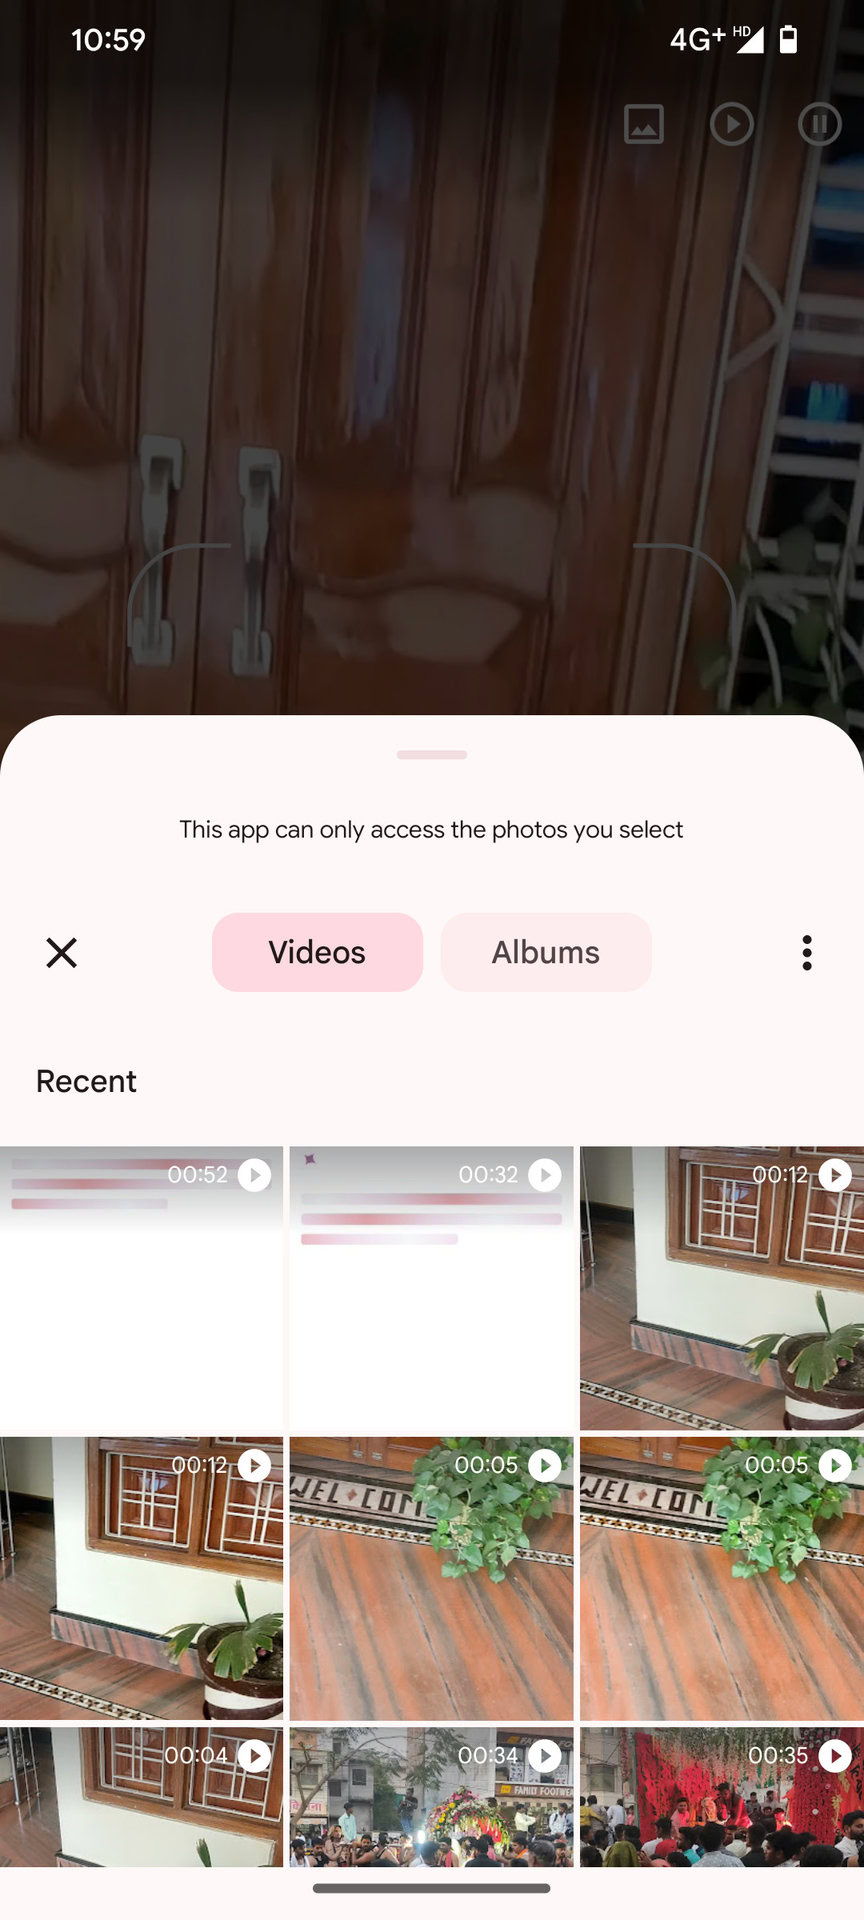 Can’t get Circle To Search? Google Lens could have you covered (APK teardown)